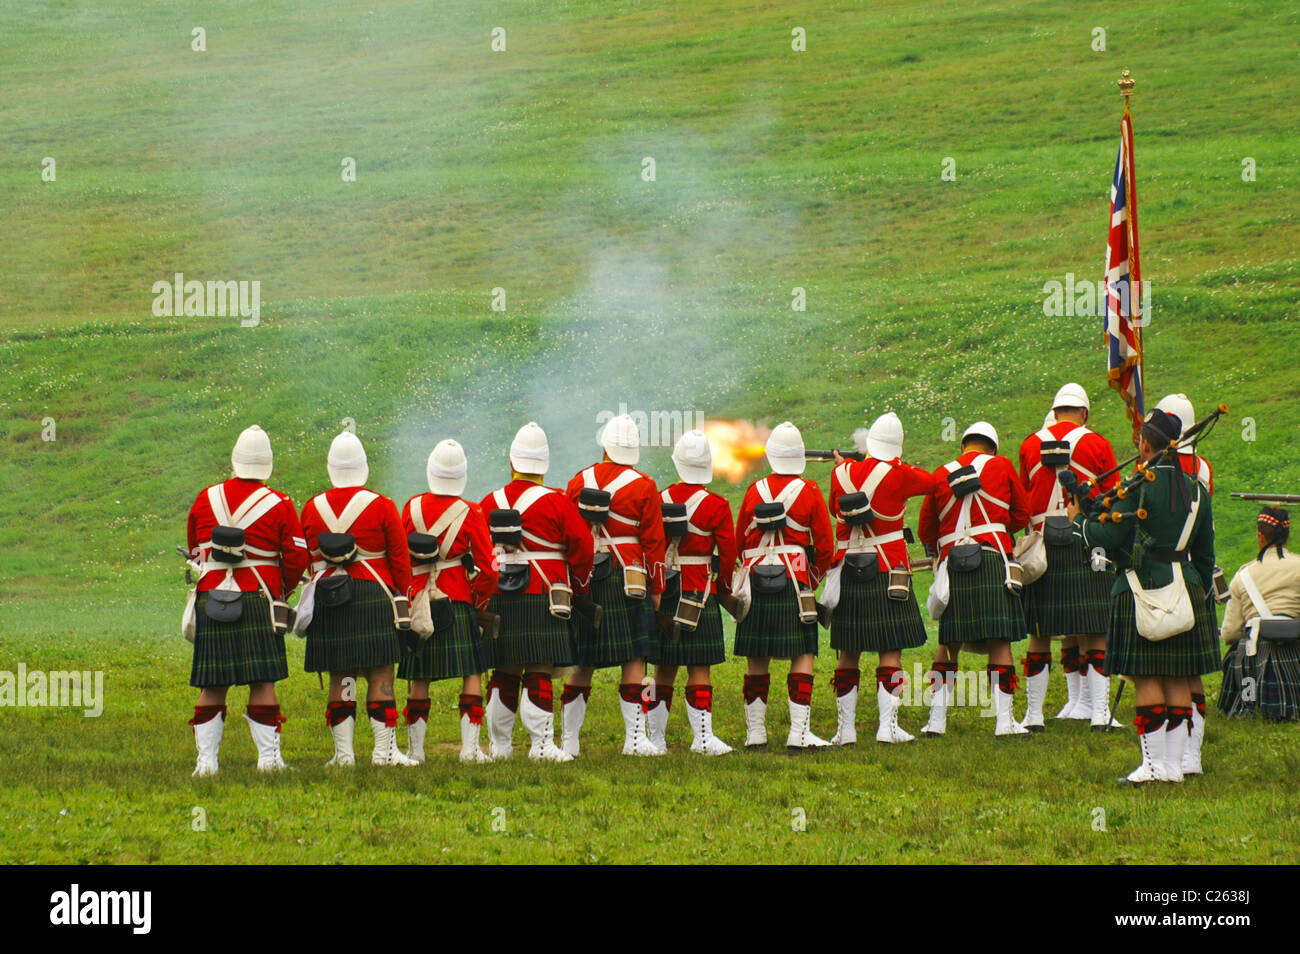 Men wearing the uniforms of The Gordon Highlanders fire replica weapons during a historical reenactment in Halifax, Nova Scotia. Stock Photo